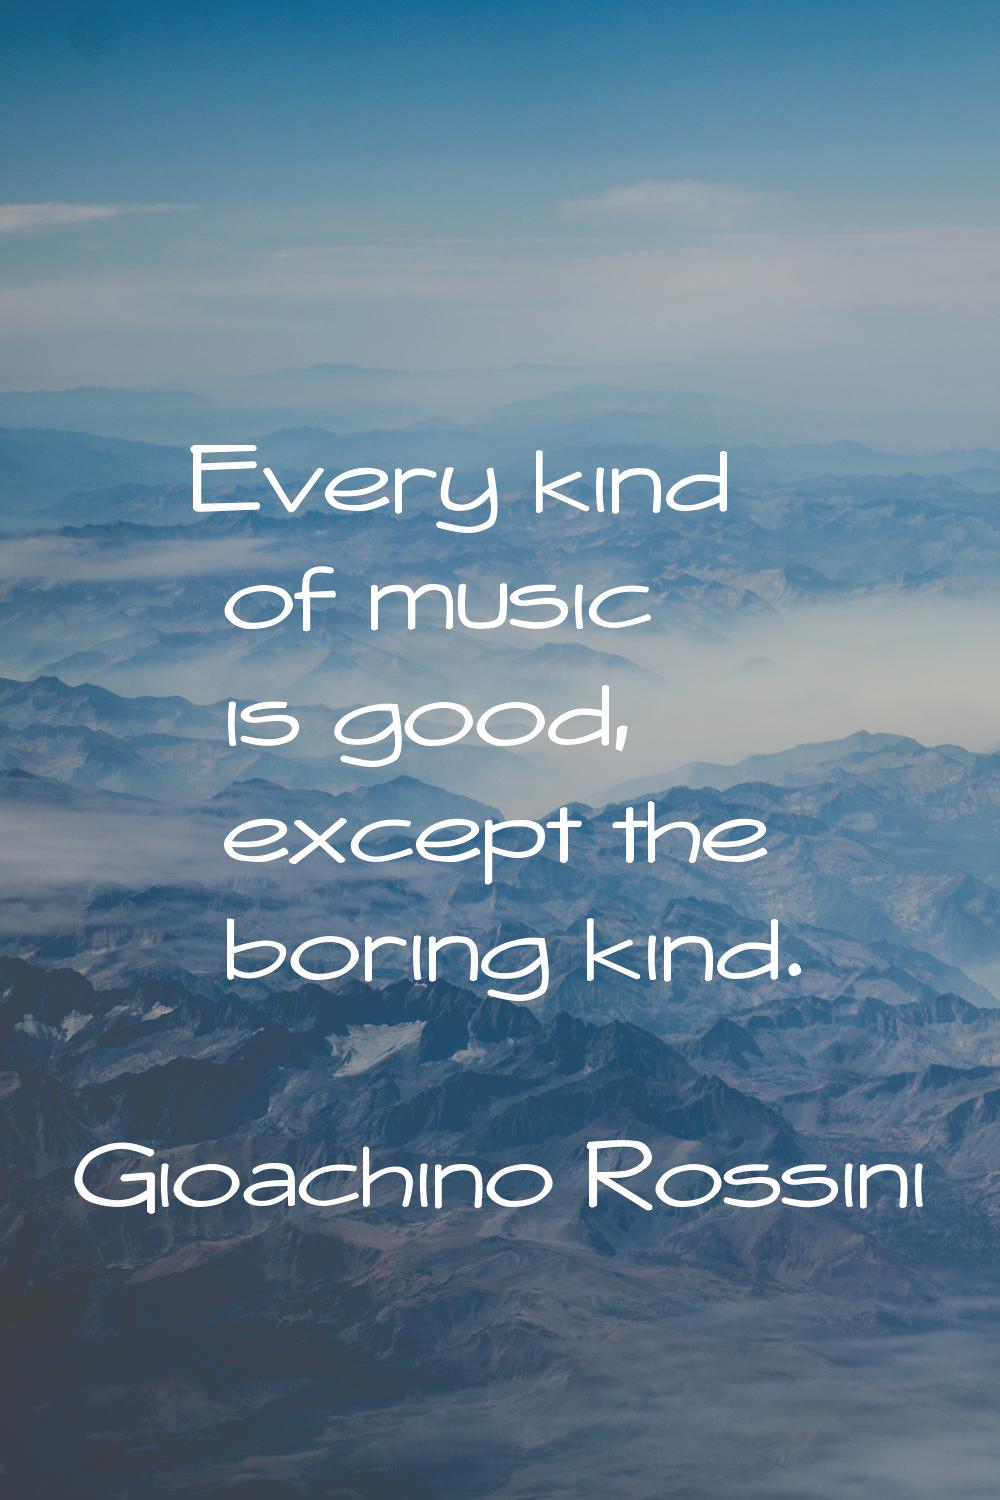 Every kind of music is good, except the boring kind.